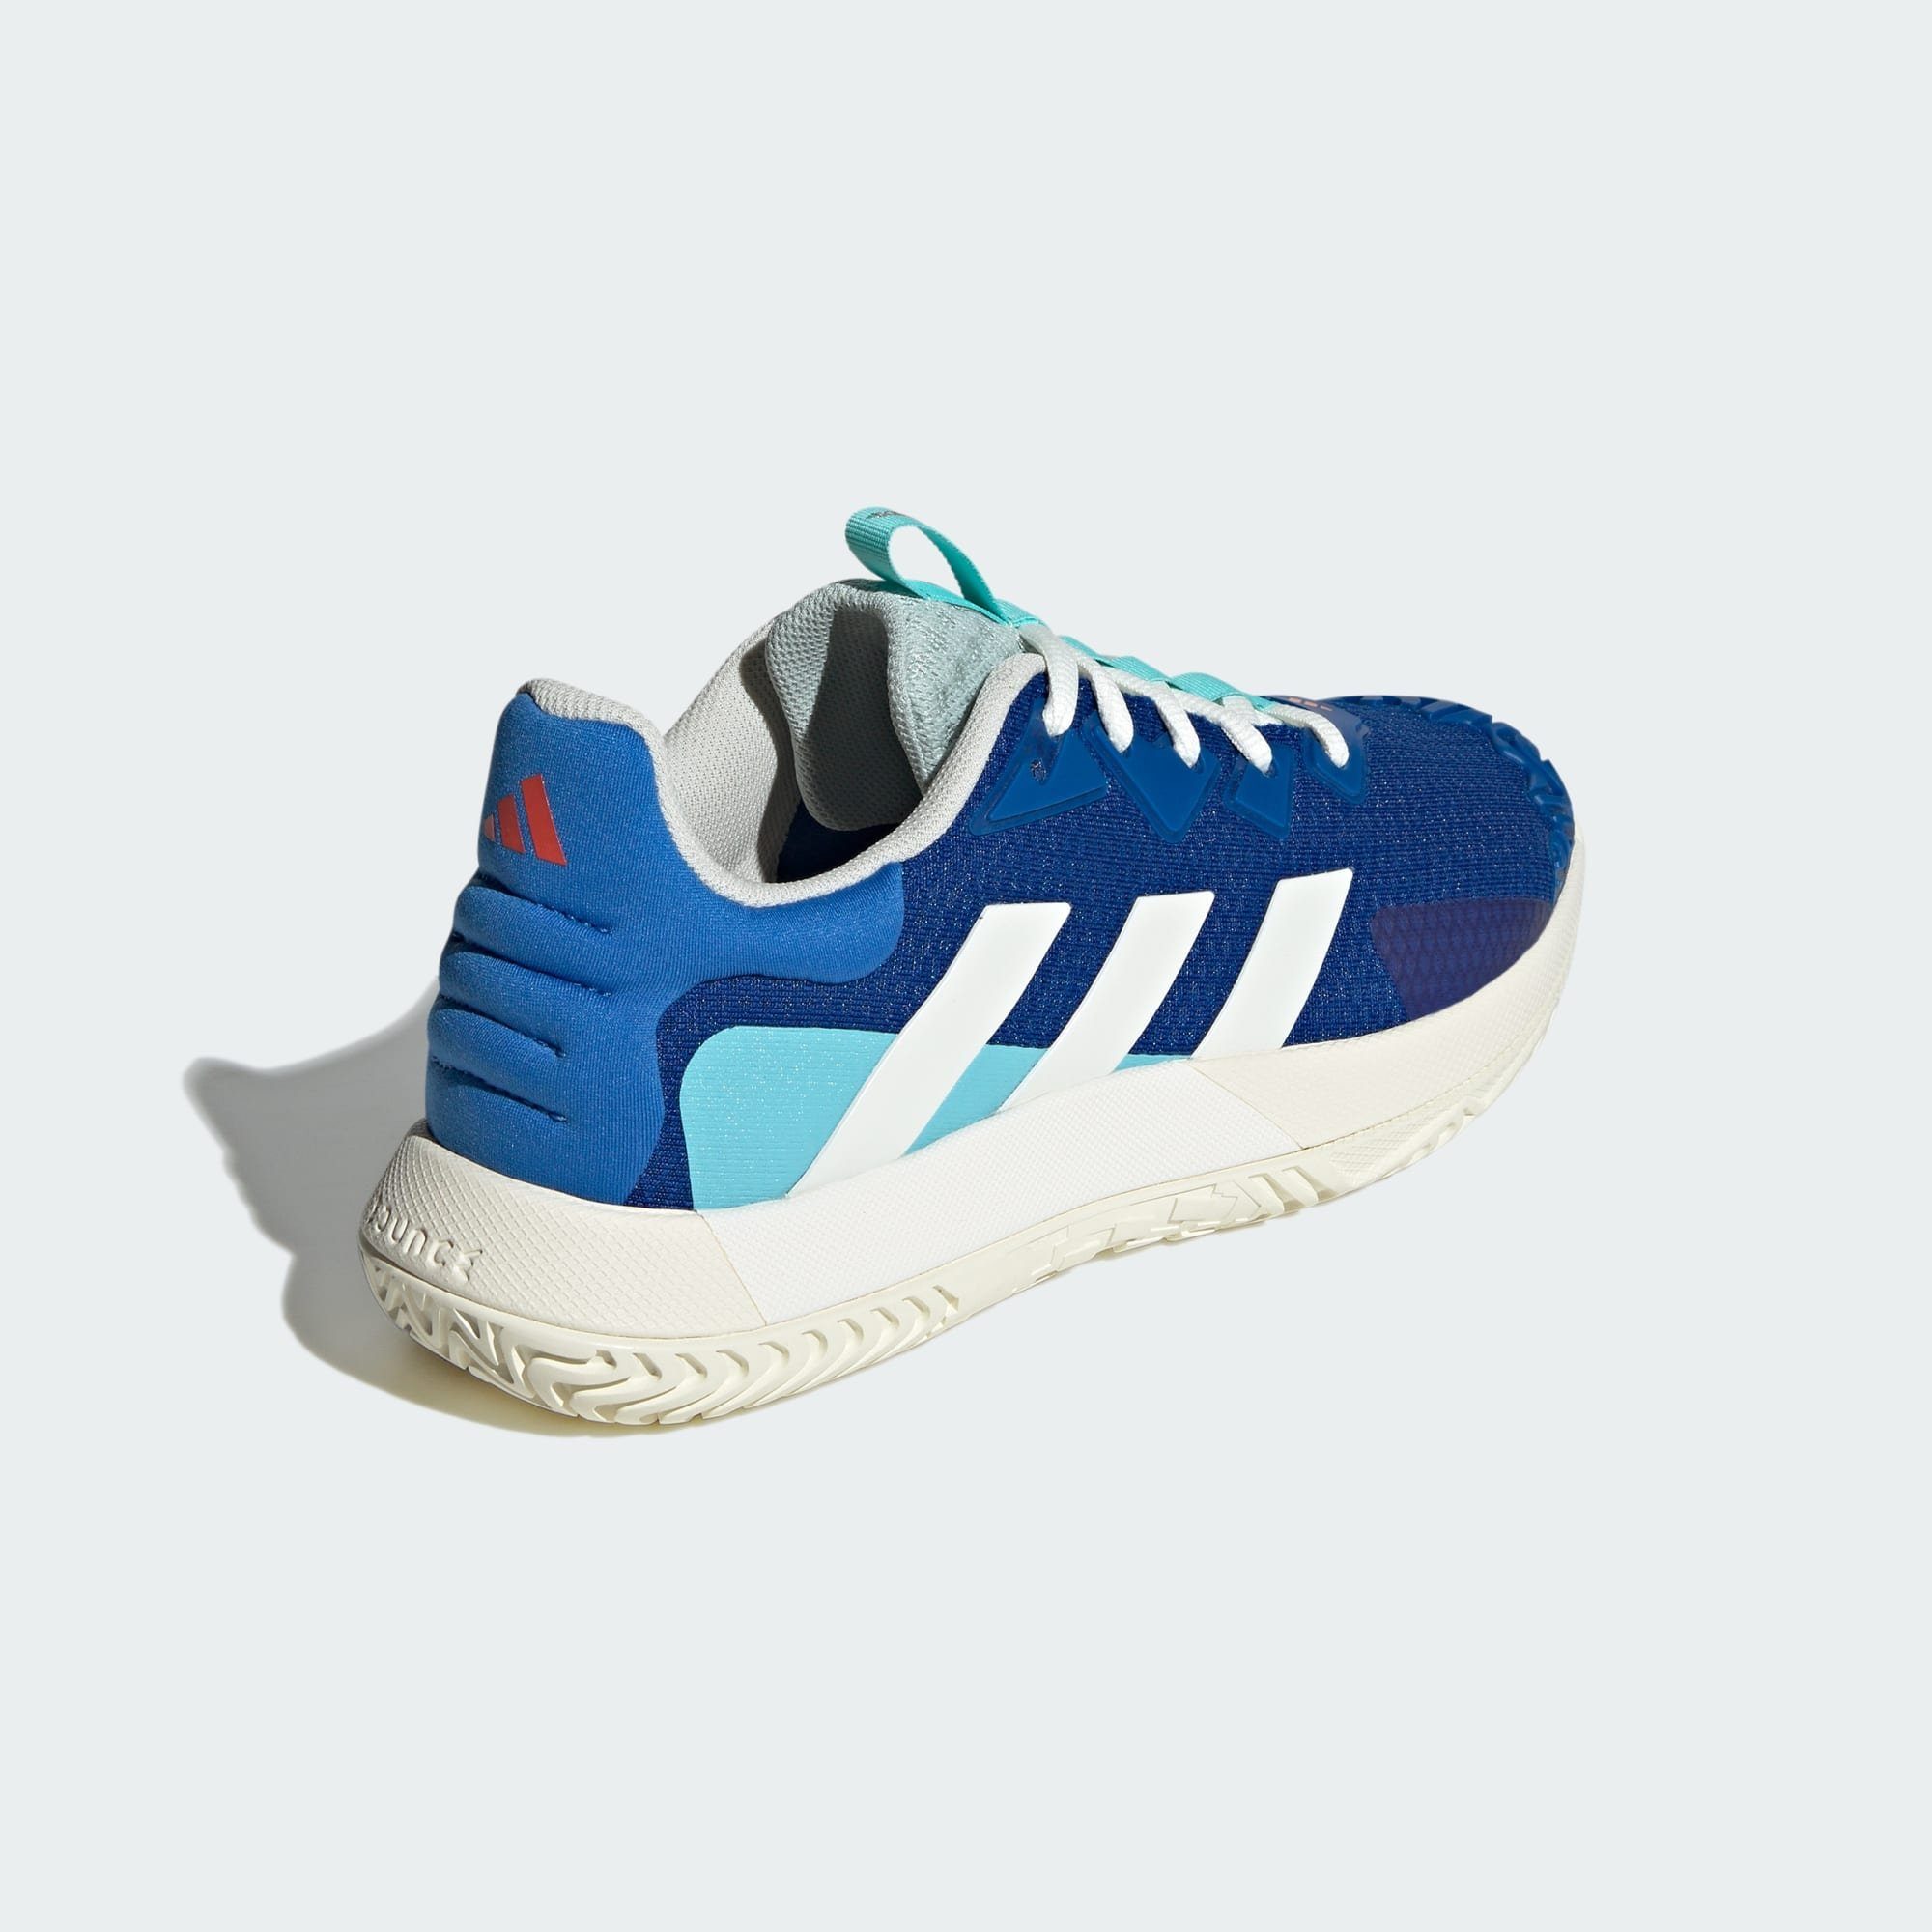 / Royal Royal Blue Off Indoorschuh TENNISSCHUH Bright White / Performance adidas SOLEMATCH CONTROL